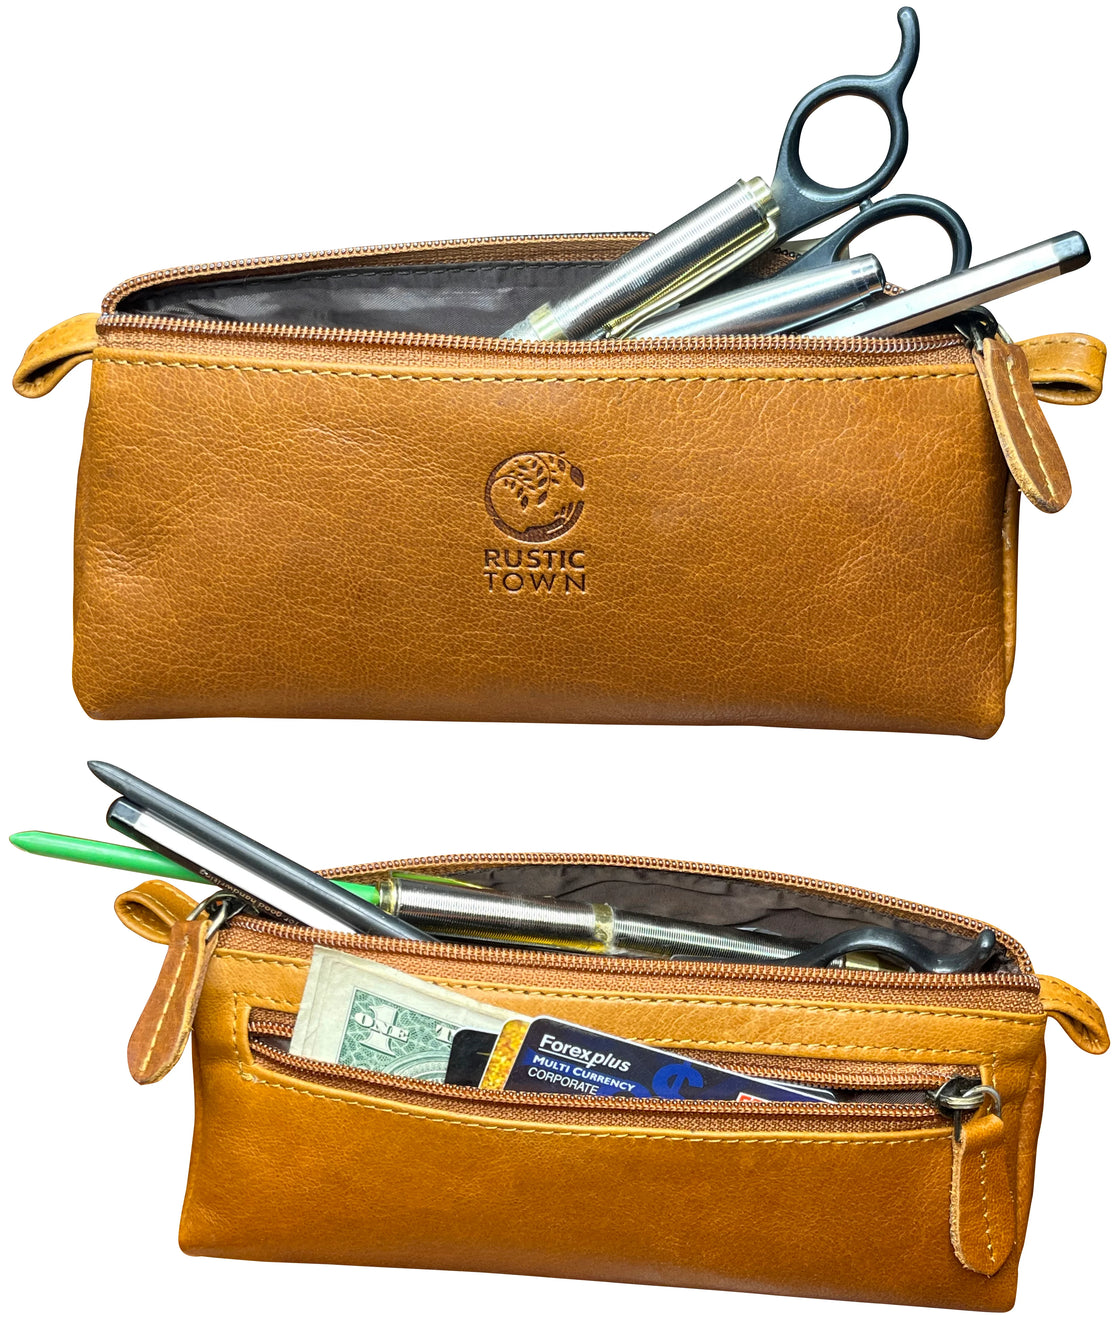 RUSTIC TOWN Leather Pencil Pouch - Zippered Pen Case for Work